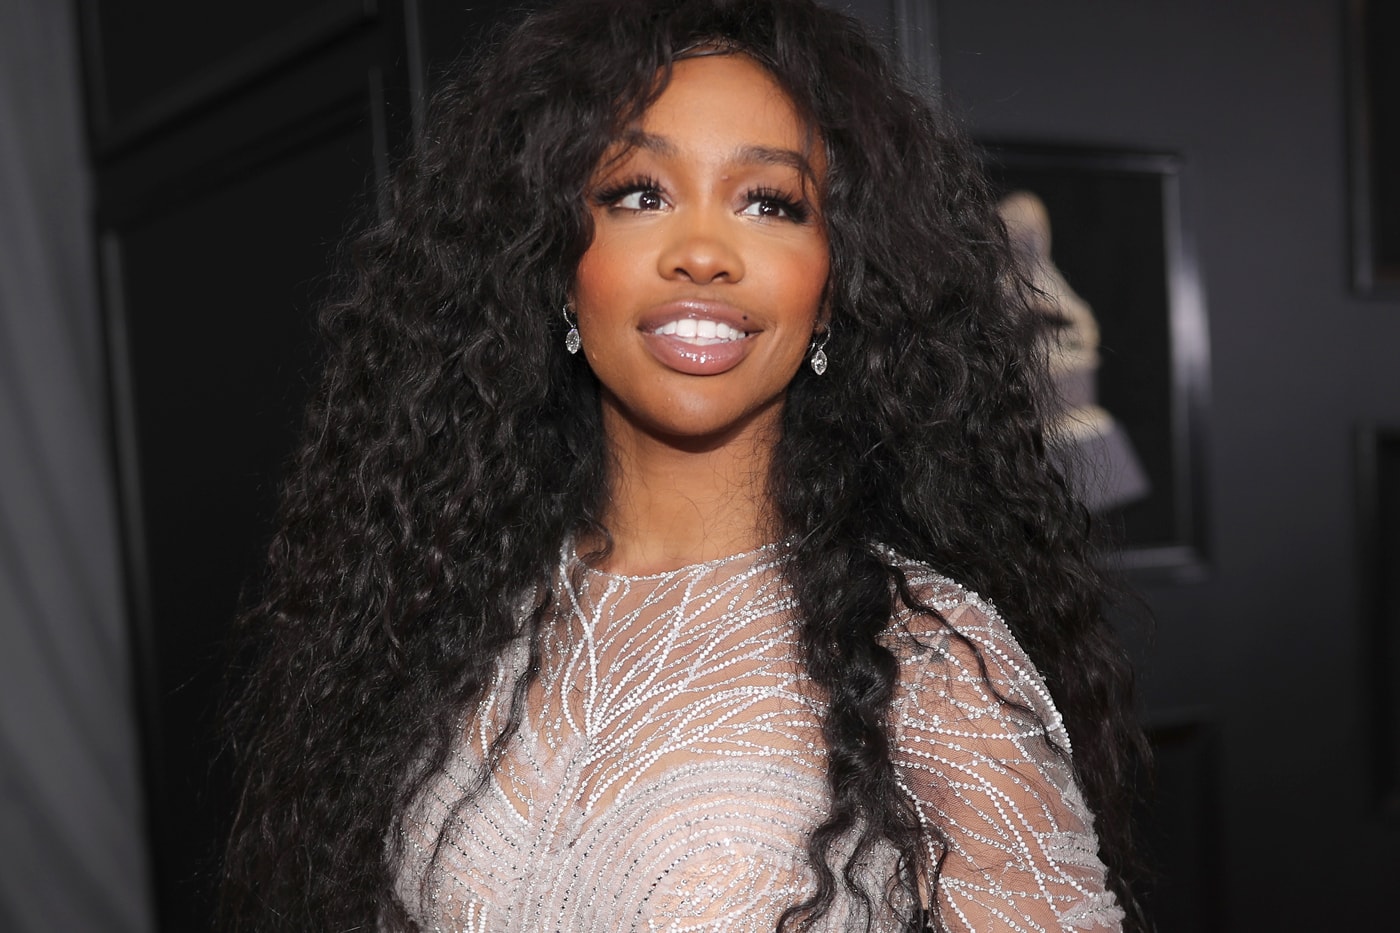 SZA Voice Permanently Injured